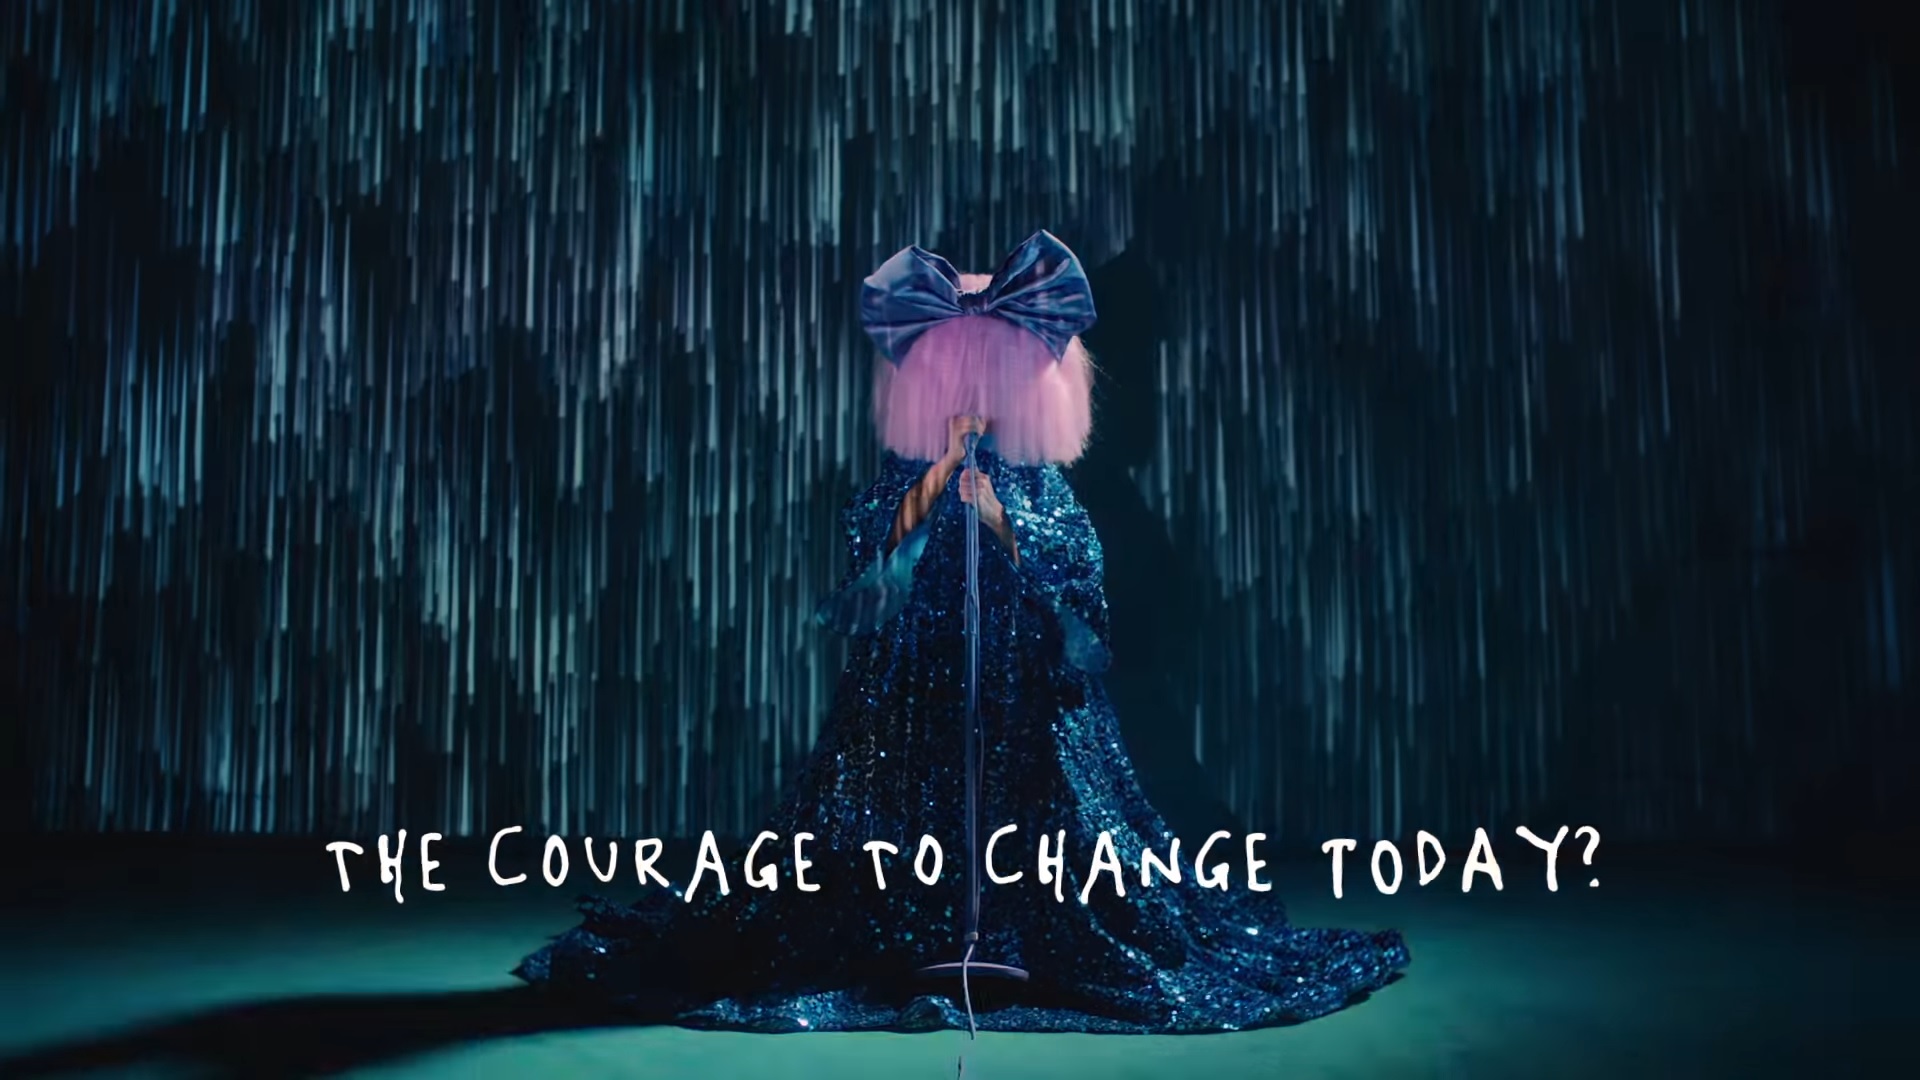 Courage to change сиа. Sia Courage to change. Courage to Changesia. Sia change